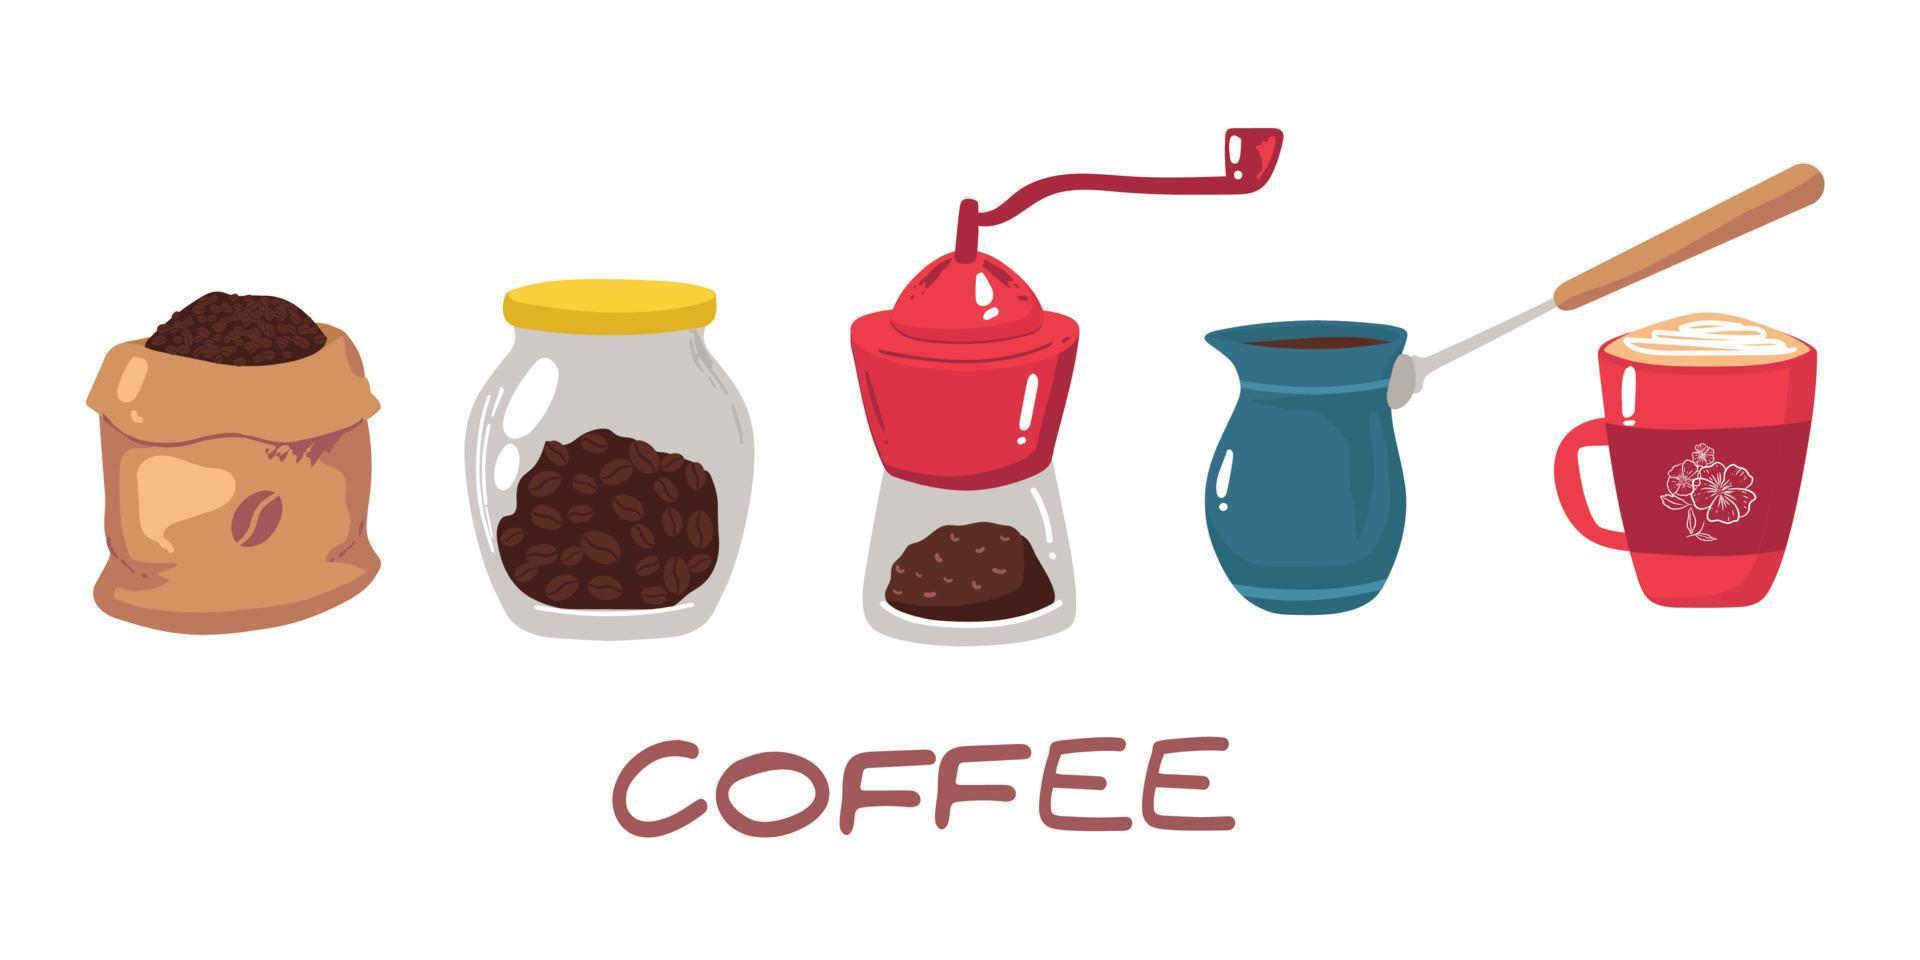 Big set of icons in flat style. Stylish coffee set of icons. Coffee, coffee drinks, coffee pots, and other devices and desserts, vector